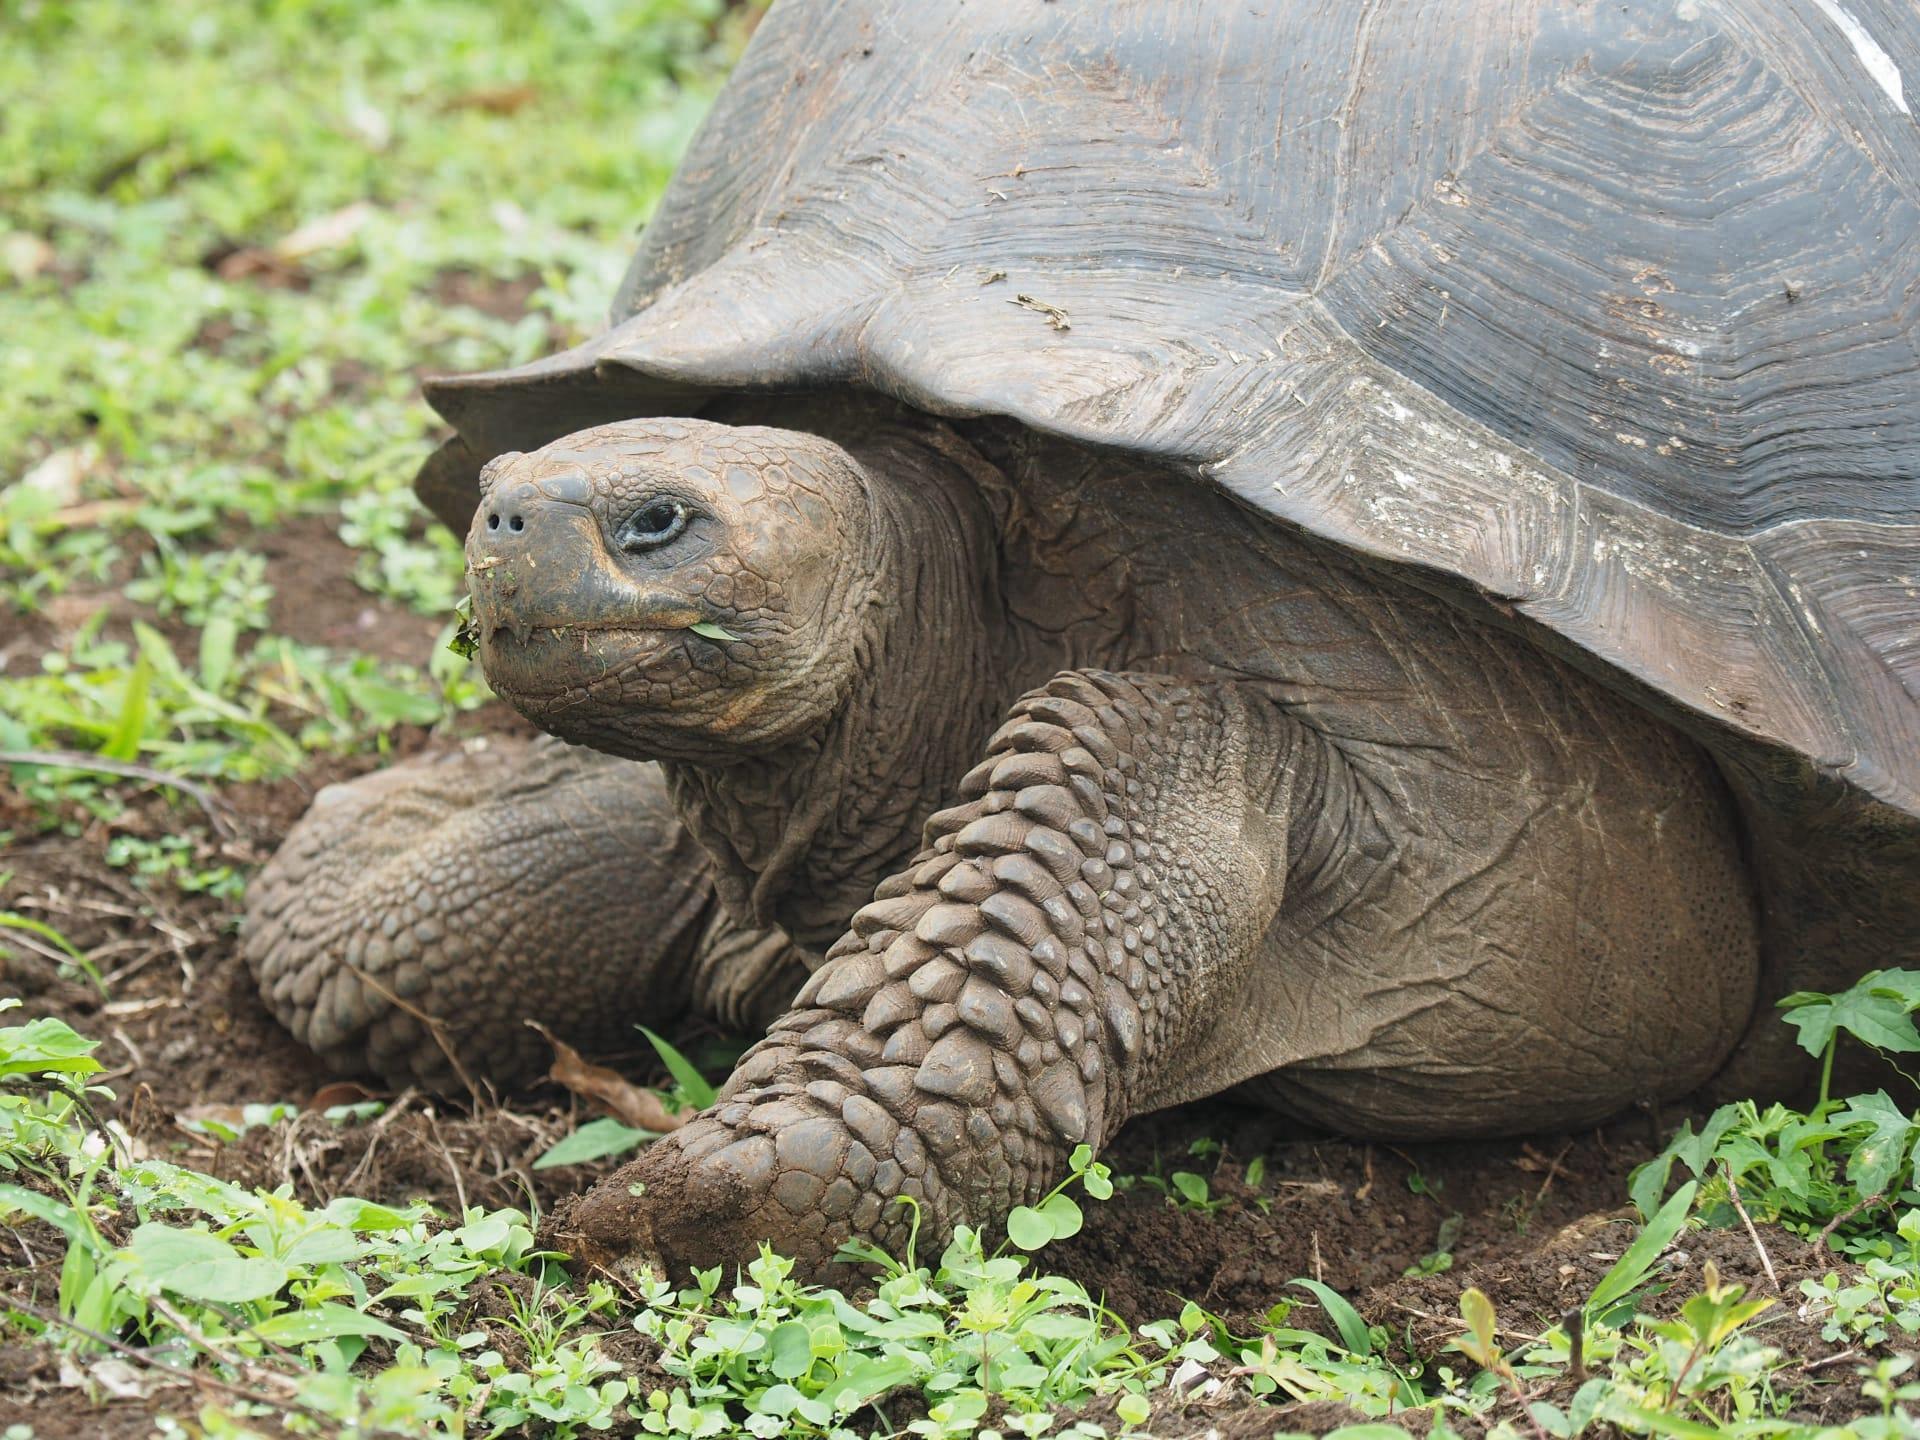 Galapagos tortoise pictures